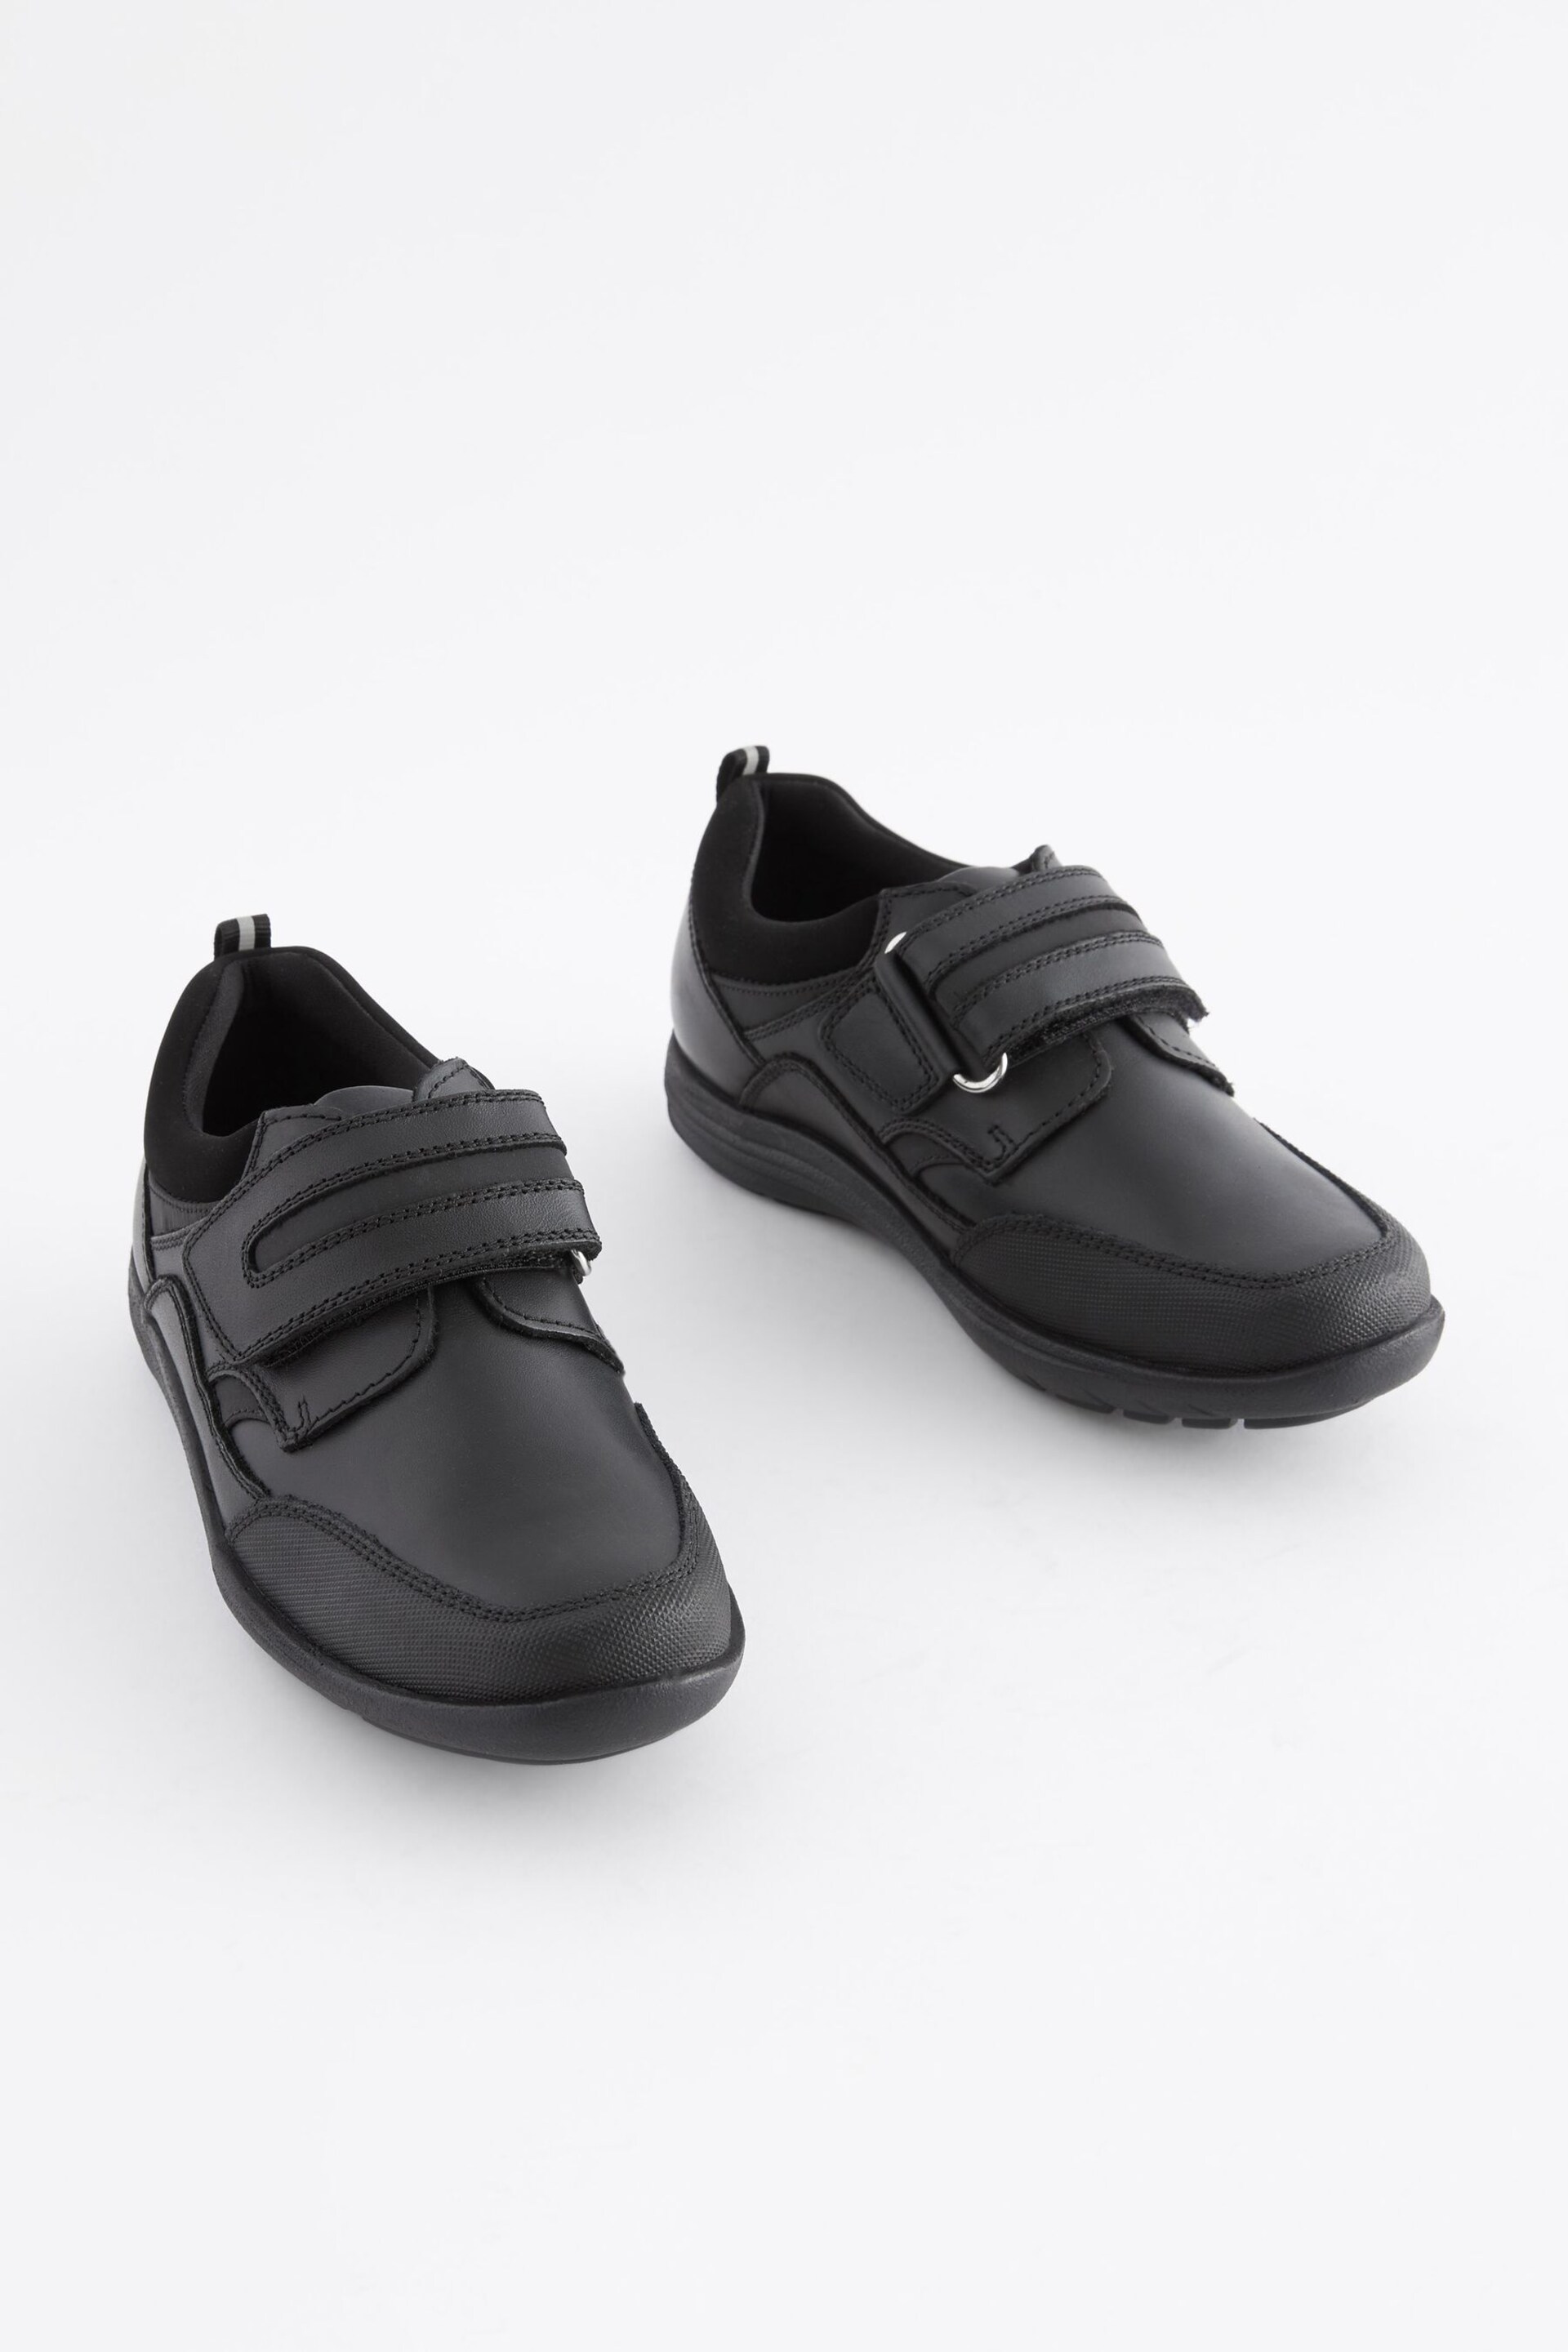 Black Narrow Fit (E) School Leather Single Strap Shoes - Image 1 of 6